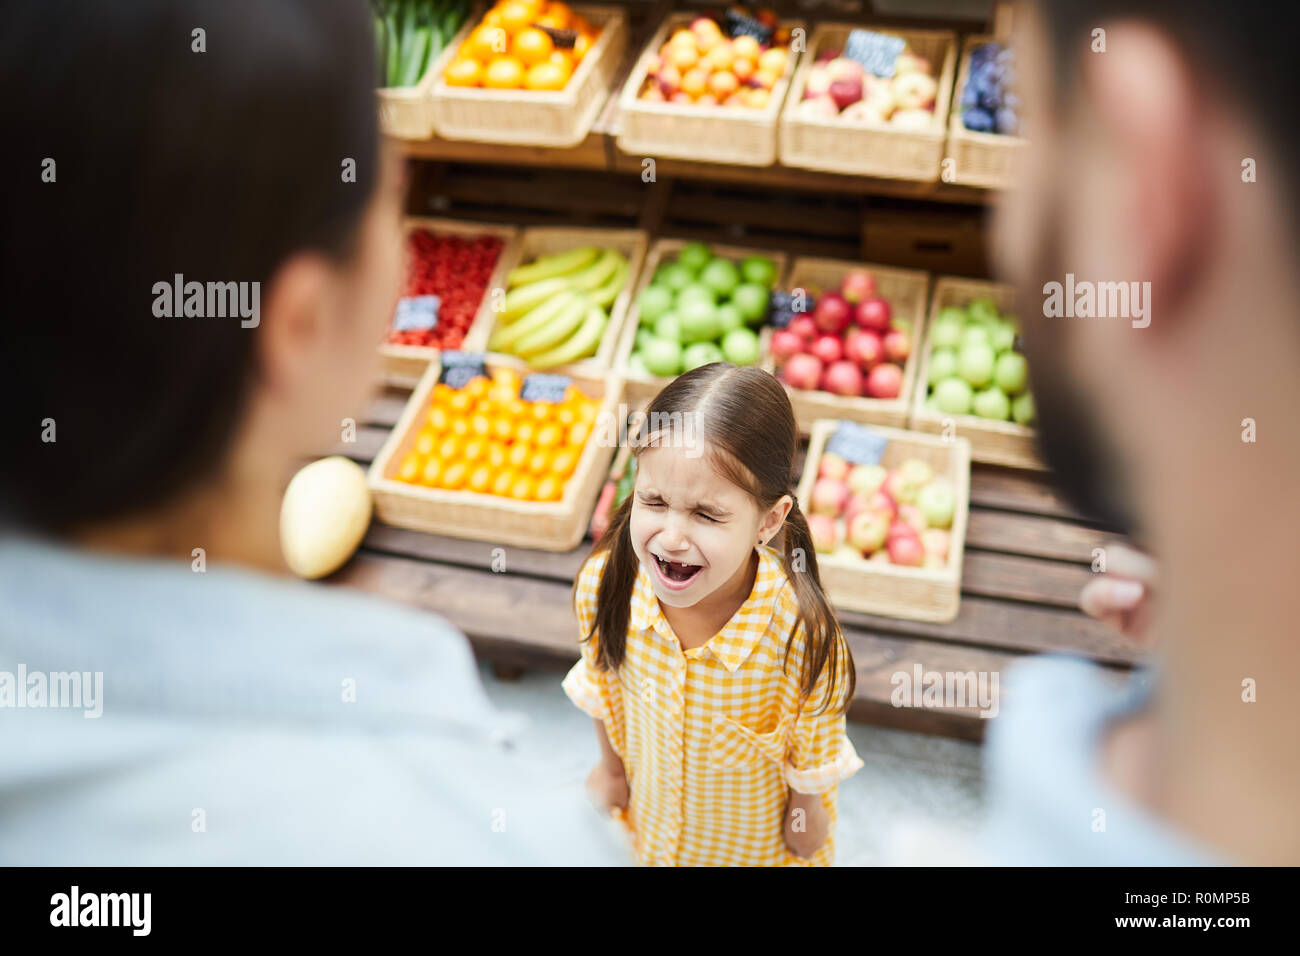 Upset hysterical girl with closed eyes crying loudly while manipulating parents and standing against food stall in supermarket Stock Photo